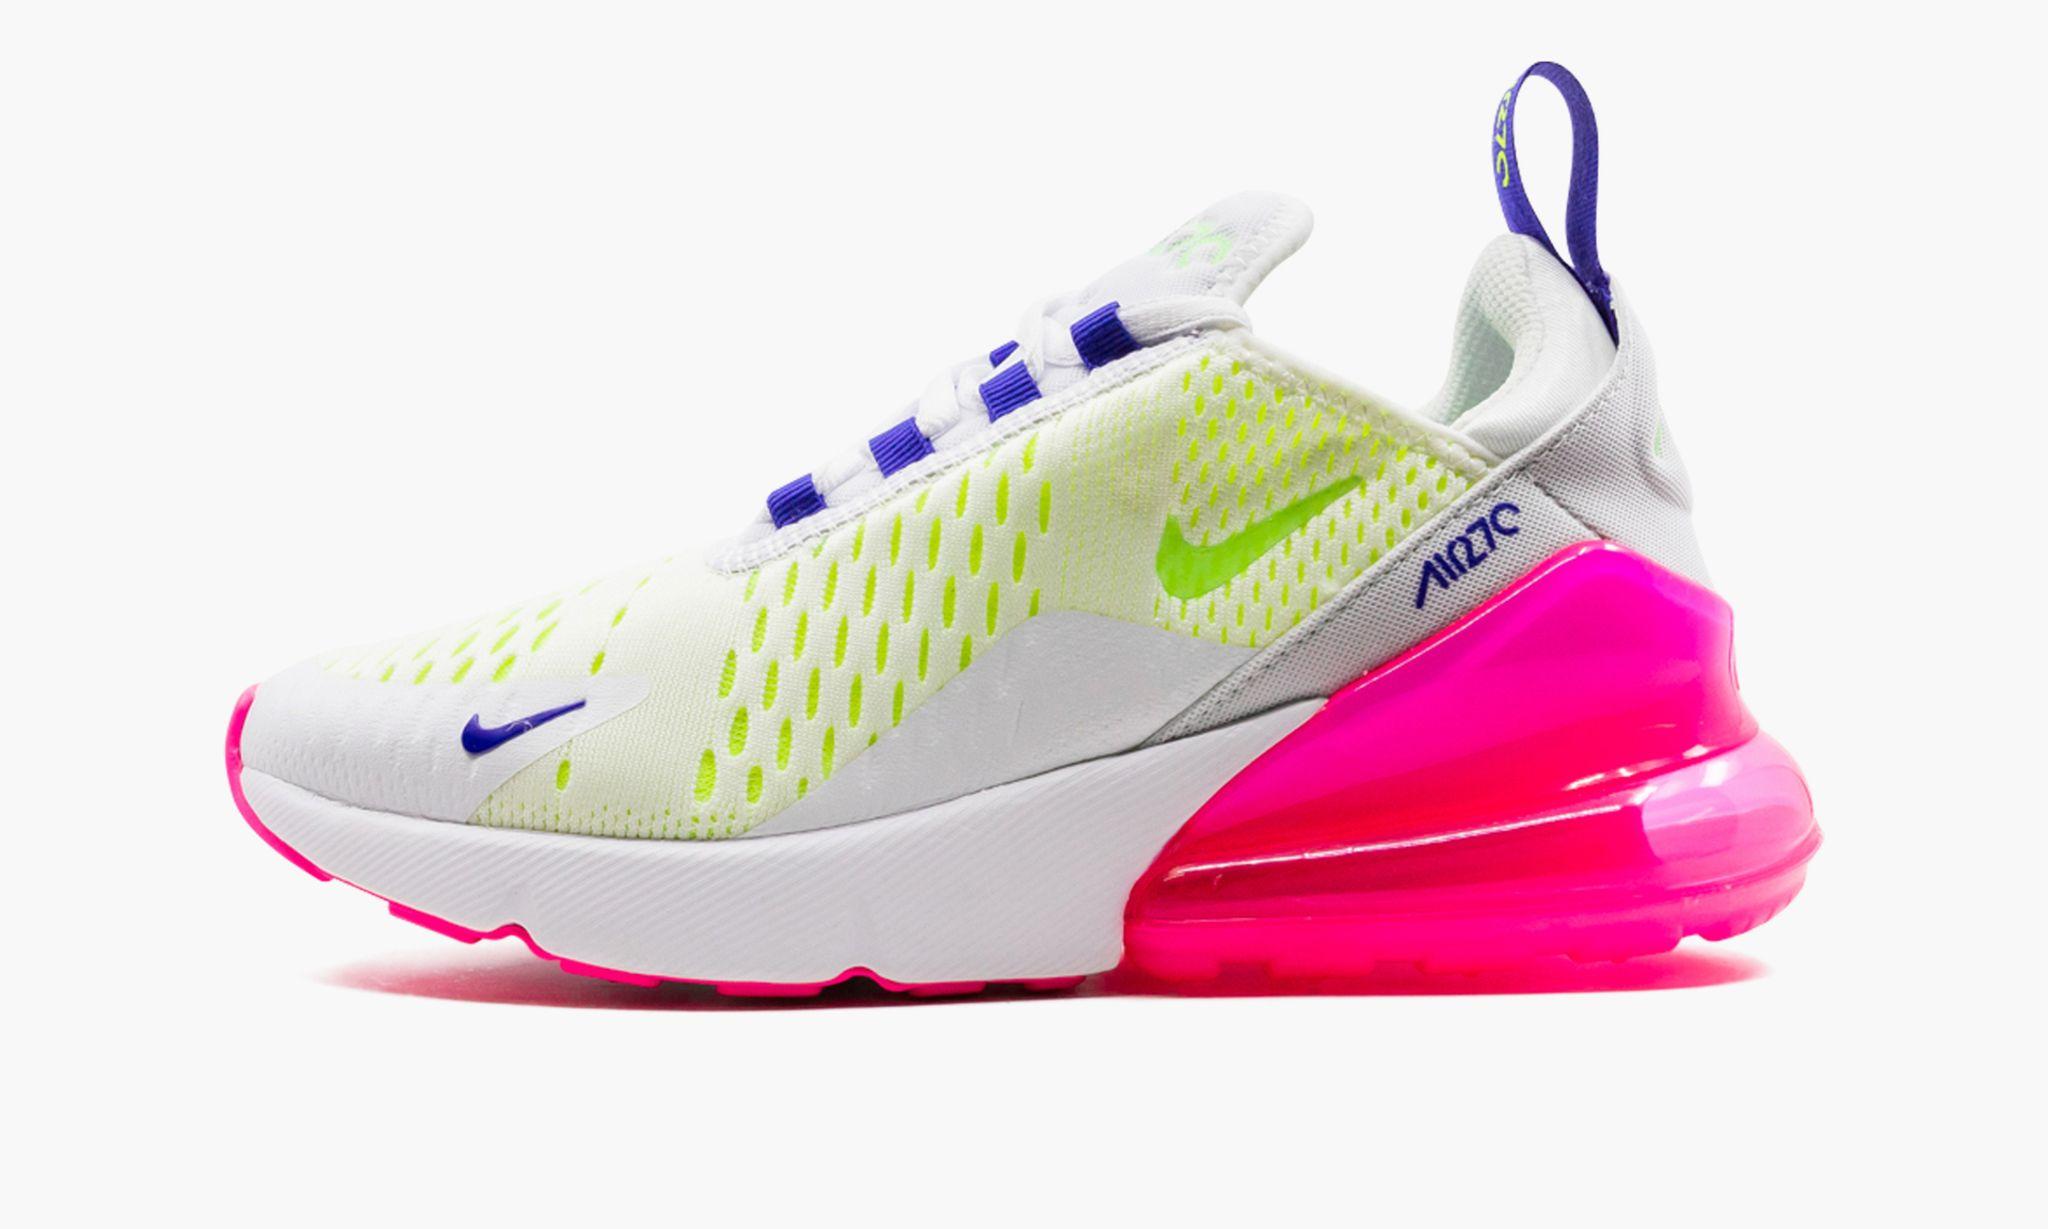 Nike Air Max 270 white / Pink Blast / Volt Shoes in Black